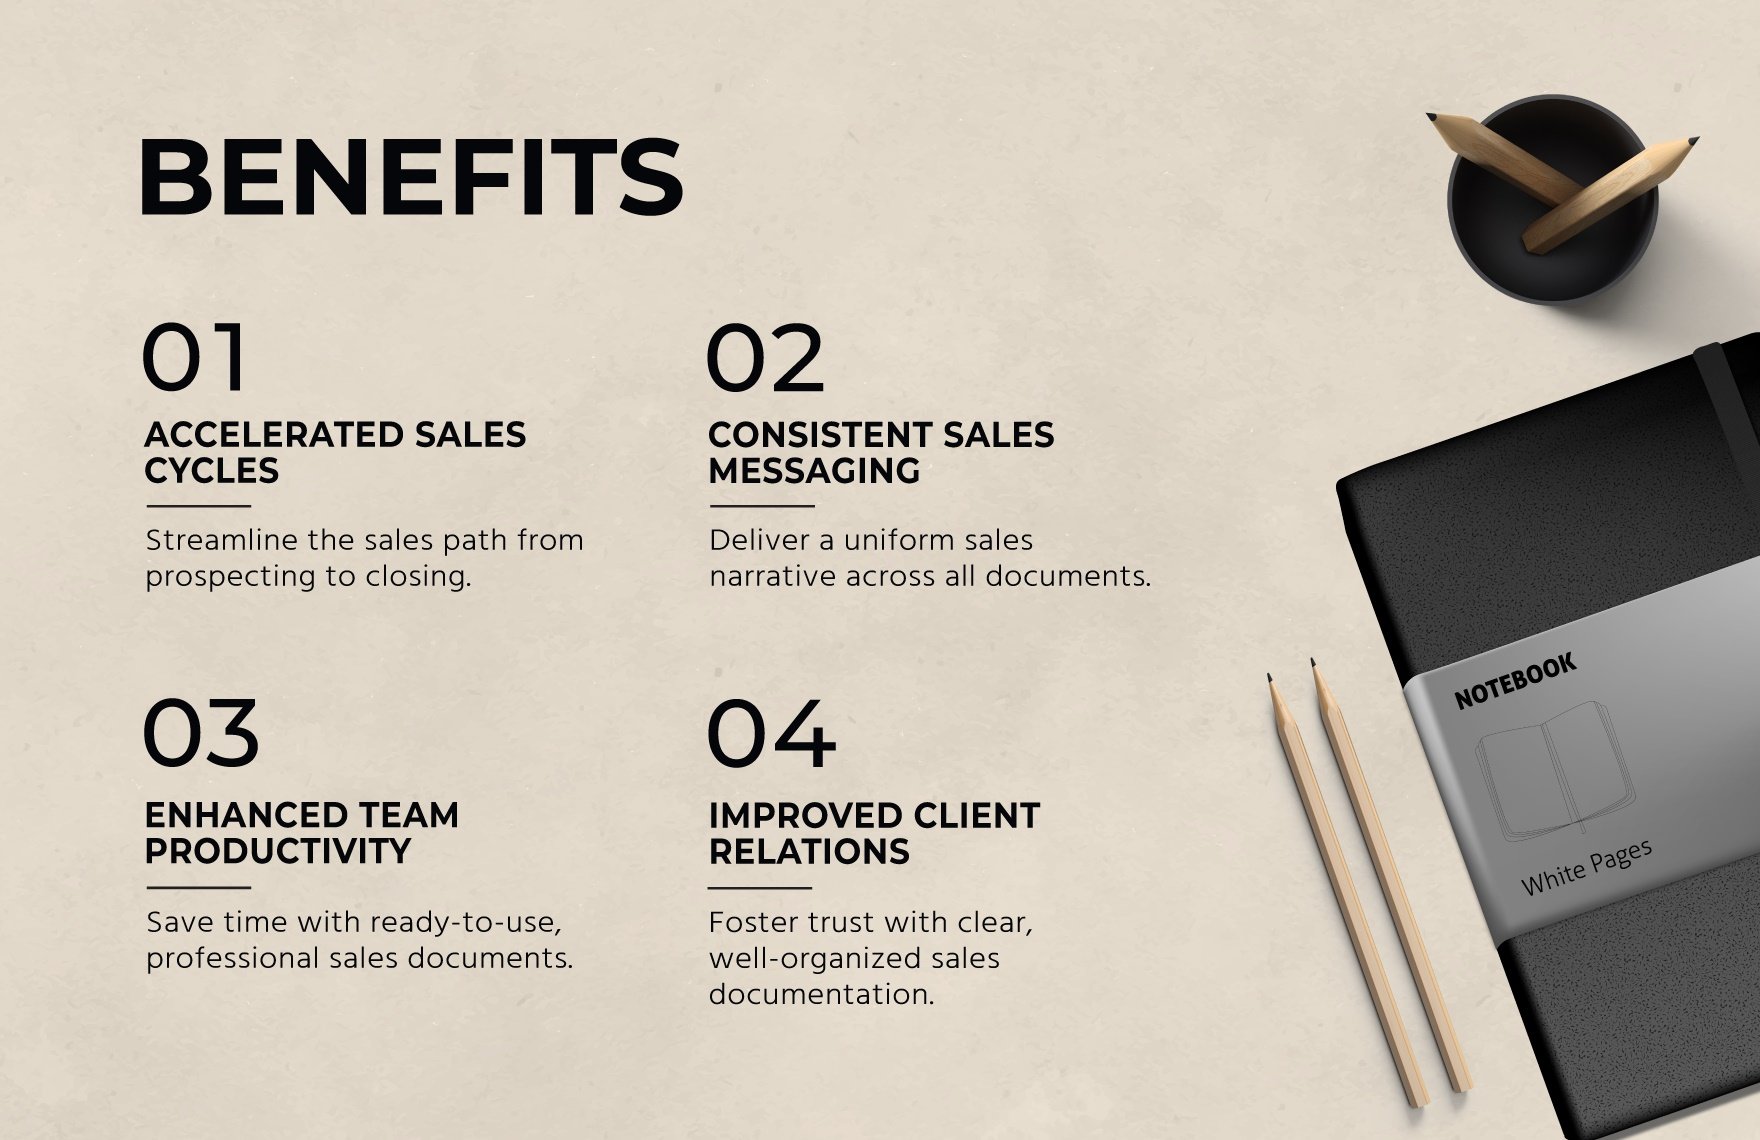 Sales Exclusive Distributor Agreement Template